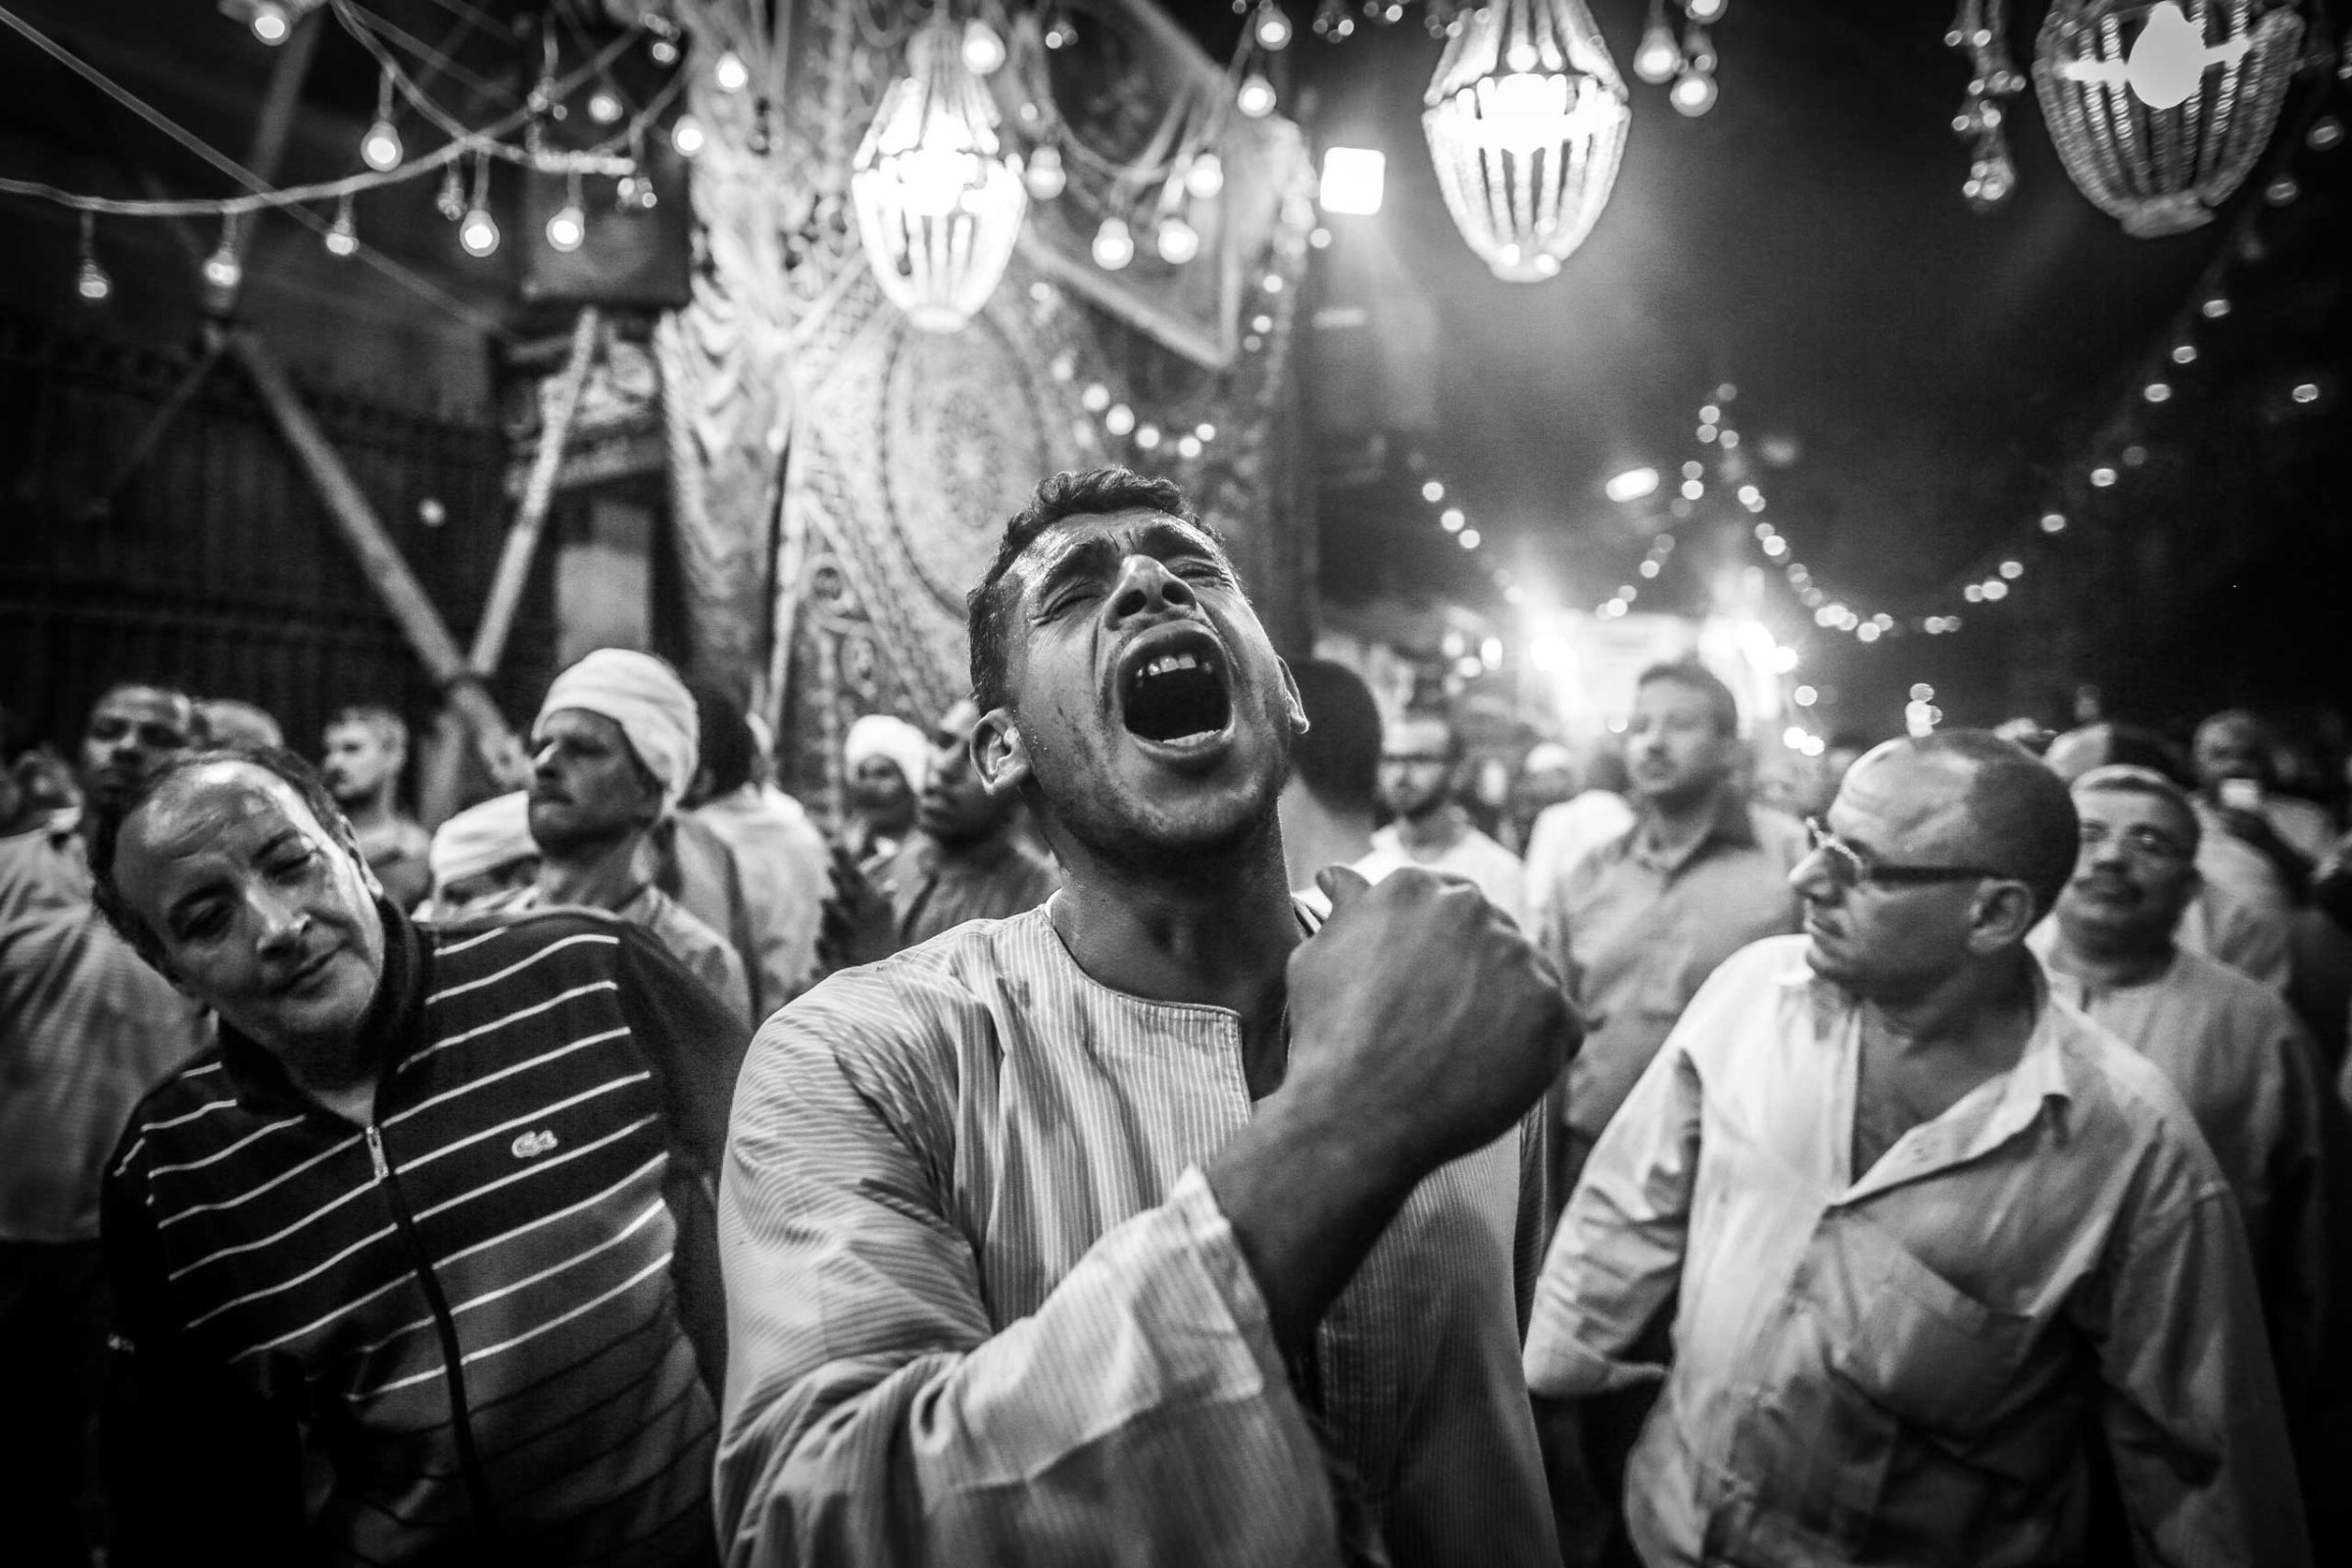 Worshippers at Mawlid Sayeda Zeinab in downtown Cairo take part in a performance in which they whirl for long periods. May 20, 2014.